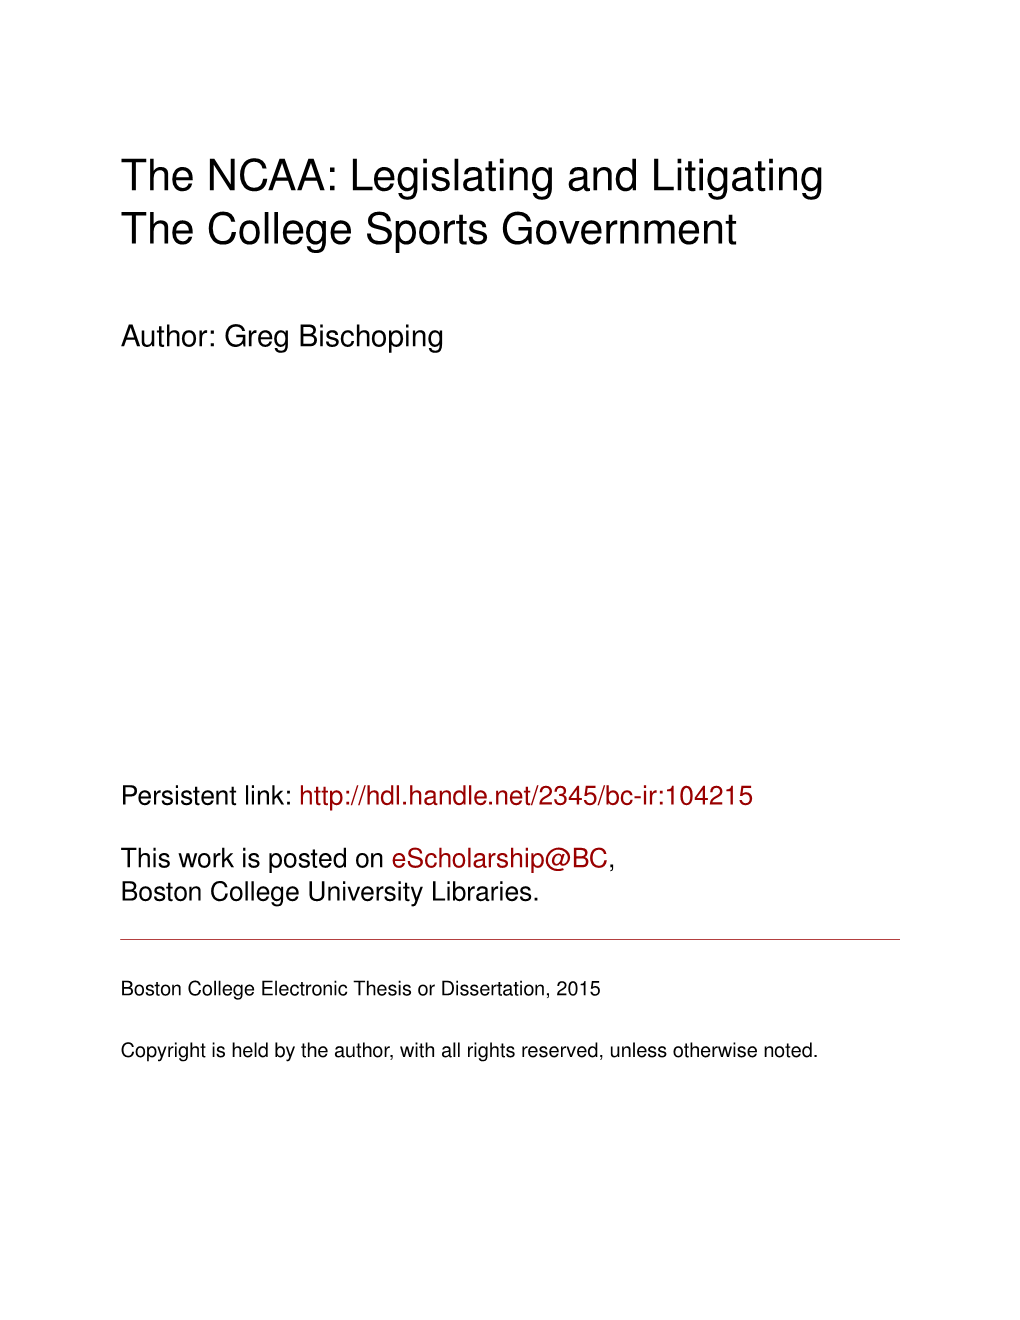 The NCAA: Legislating and Litigating the College Sports Government